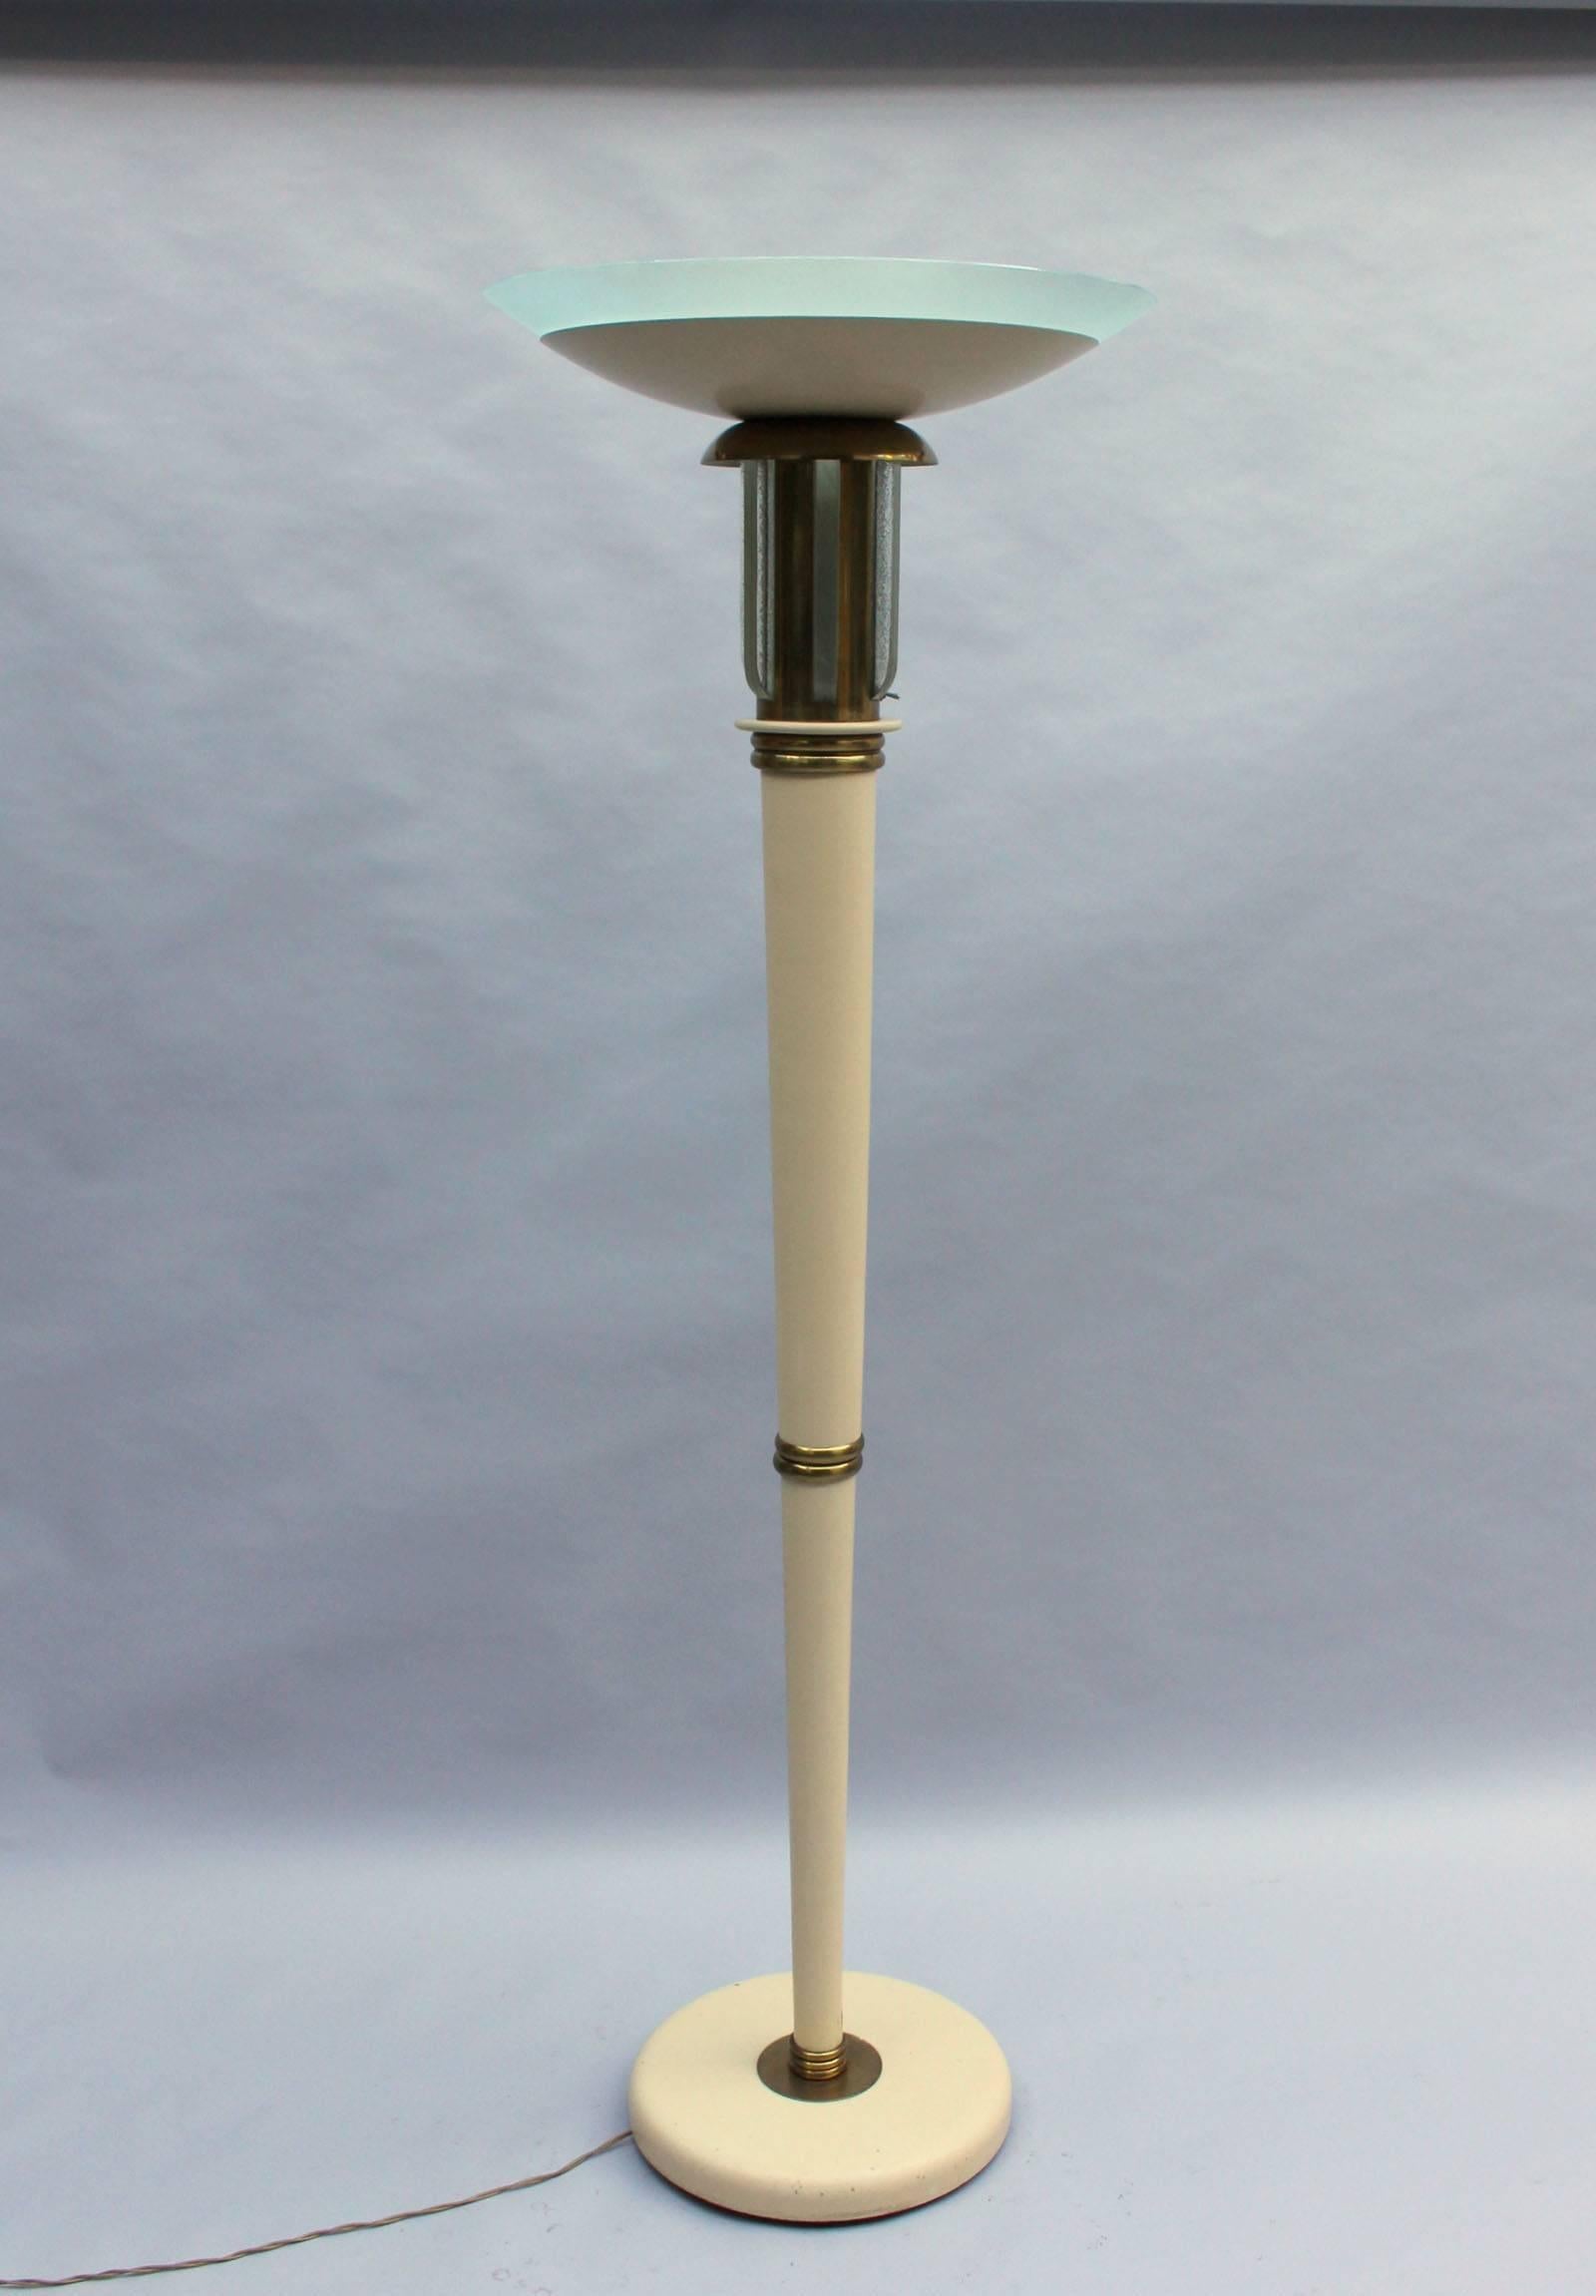 A fine French Art Deco lacquered metal and wood floor lamp with a glass bowl, glass diffusers and brass details.